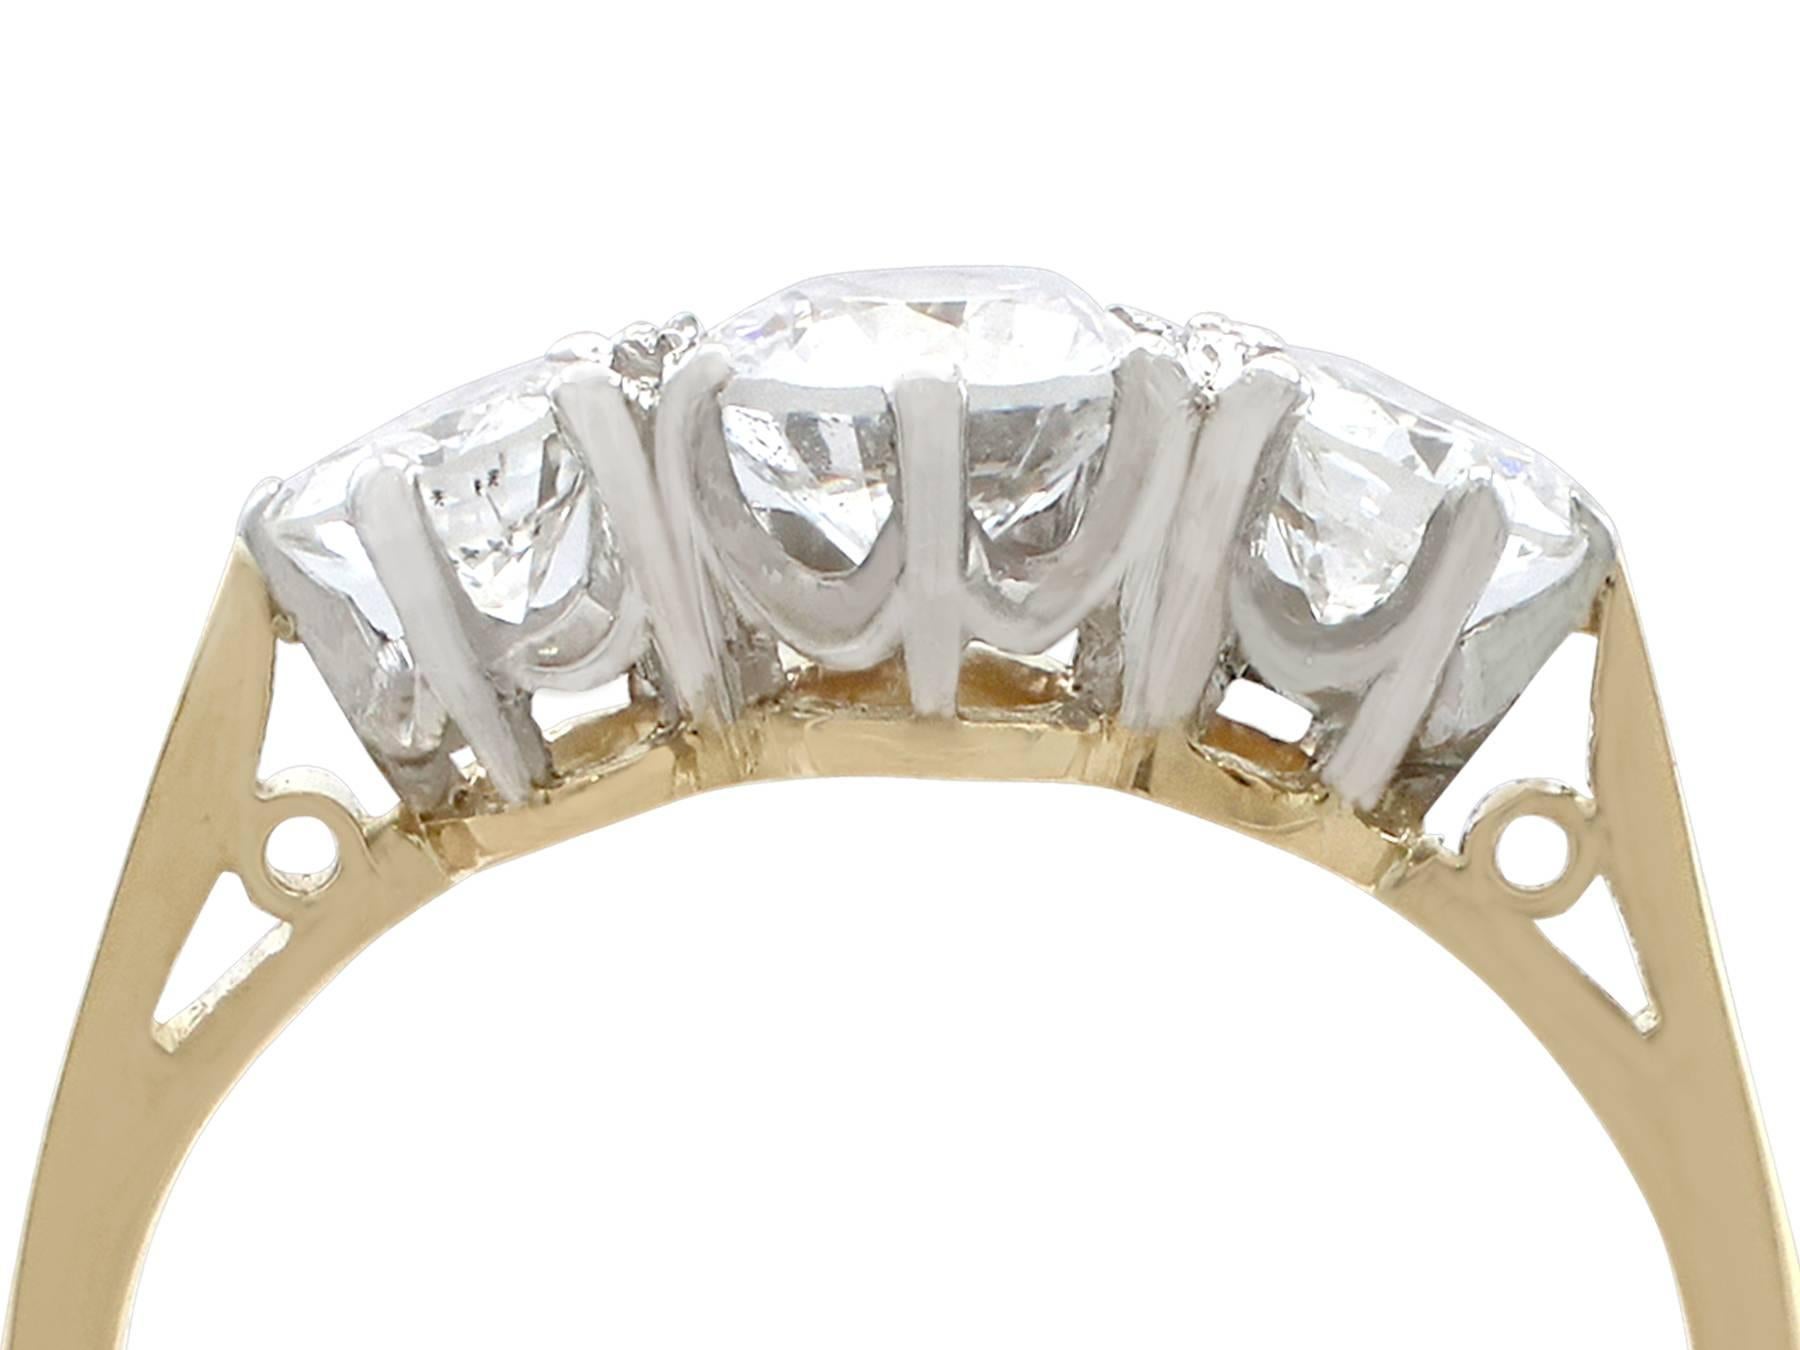 A fine and impressive vintage 1.27 carat diamond and 18 karat yellow gold, platinum set three stone/trilogy ring; part of our vintage jewelry and estate jewelry collections

This fine vintage three stone engagement ring has been crafted in 18k